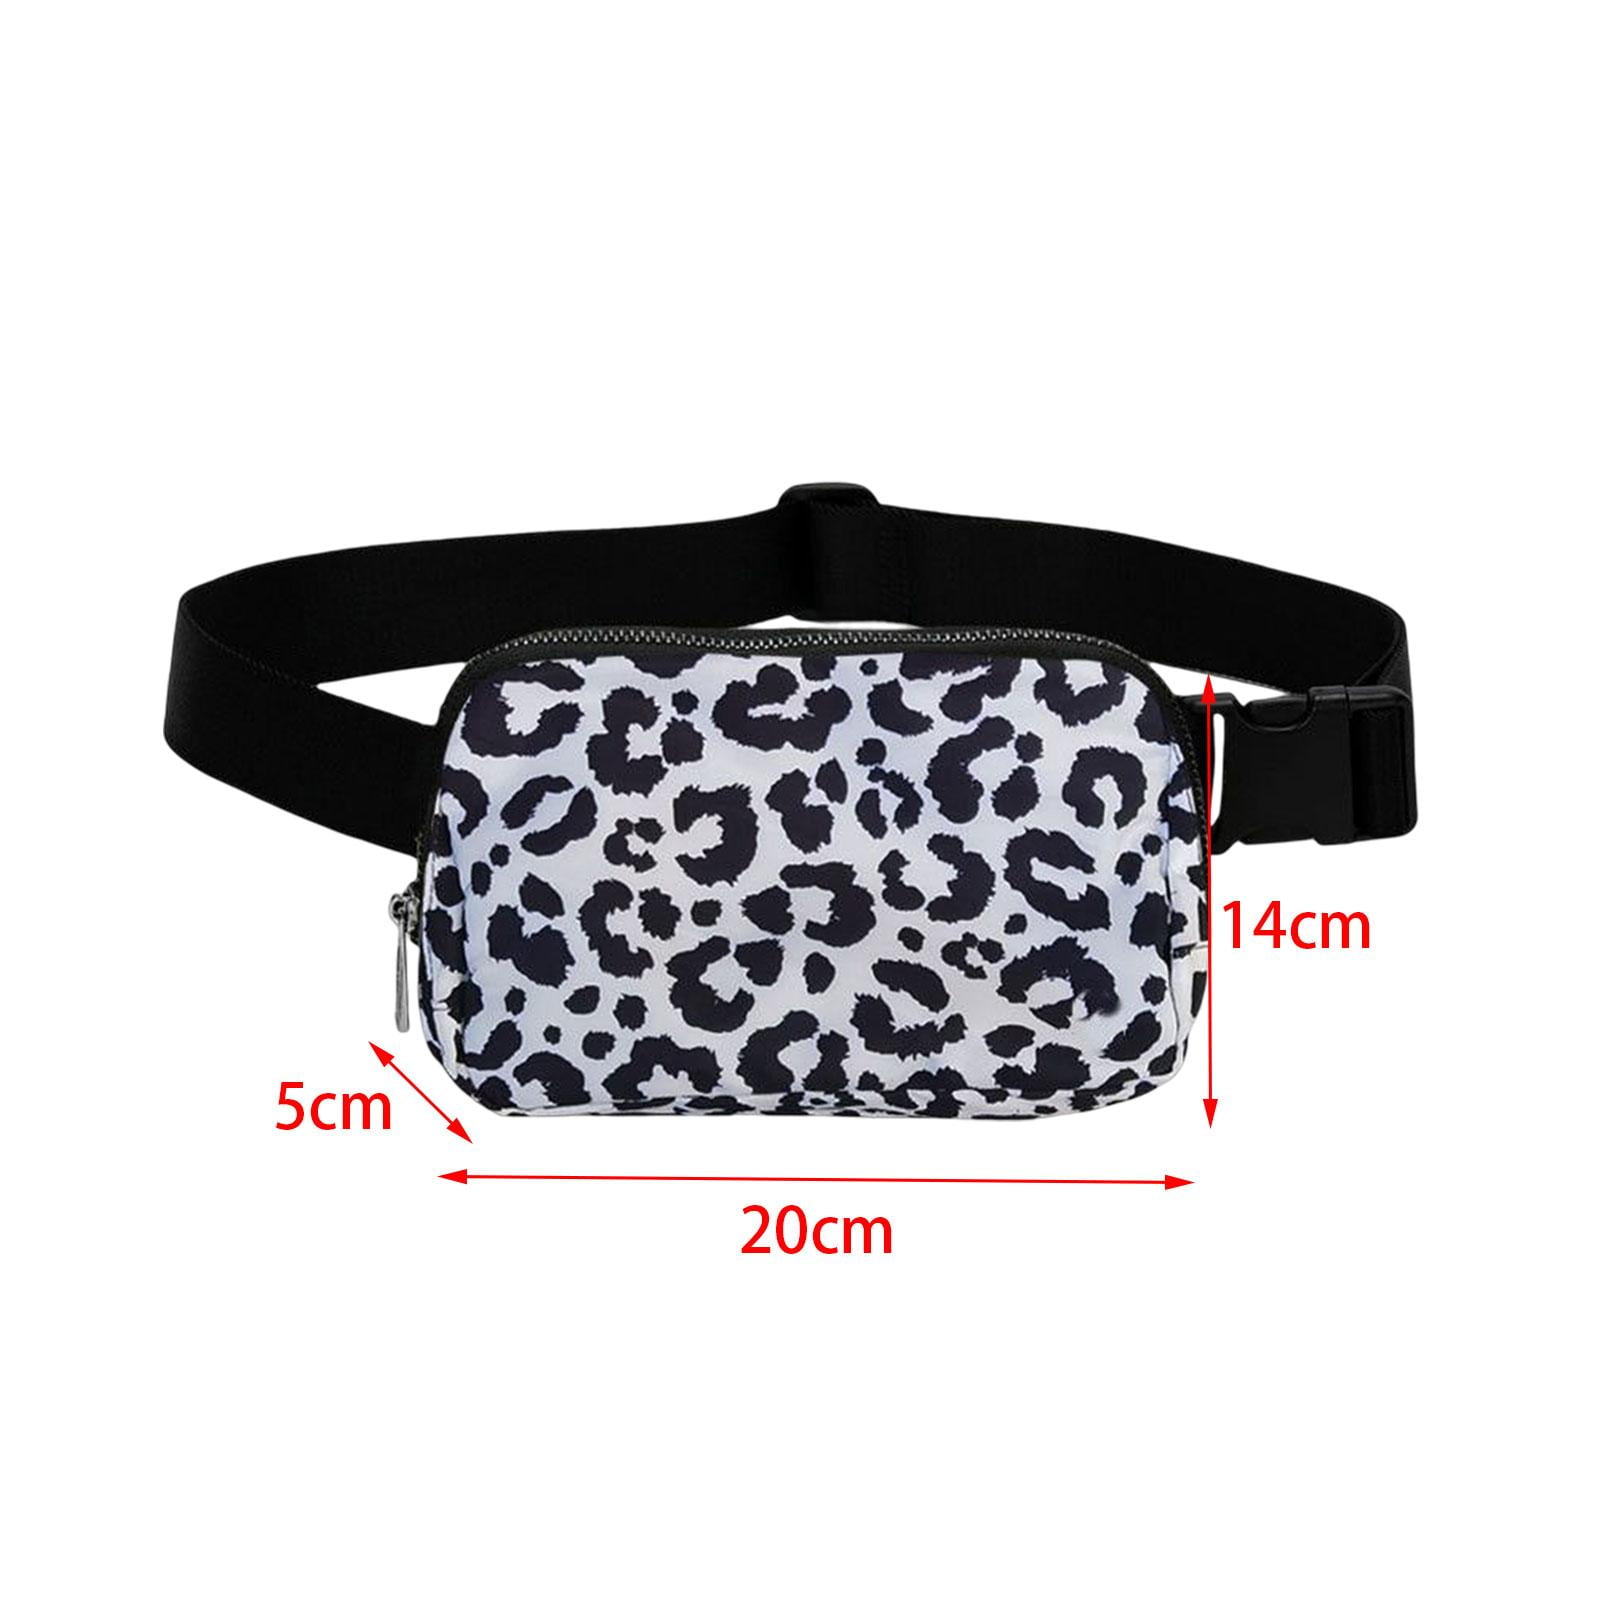  Cute Monkey On Tree Fanny Pack Waist Bag For Men Women  Adjustable Belt Bag Waist Pouch For Travel Hiking Cycling